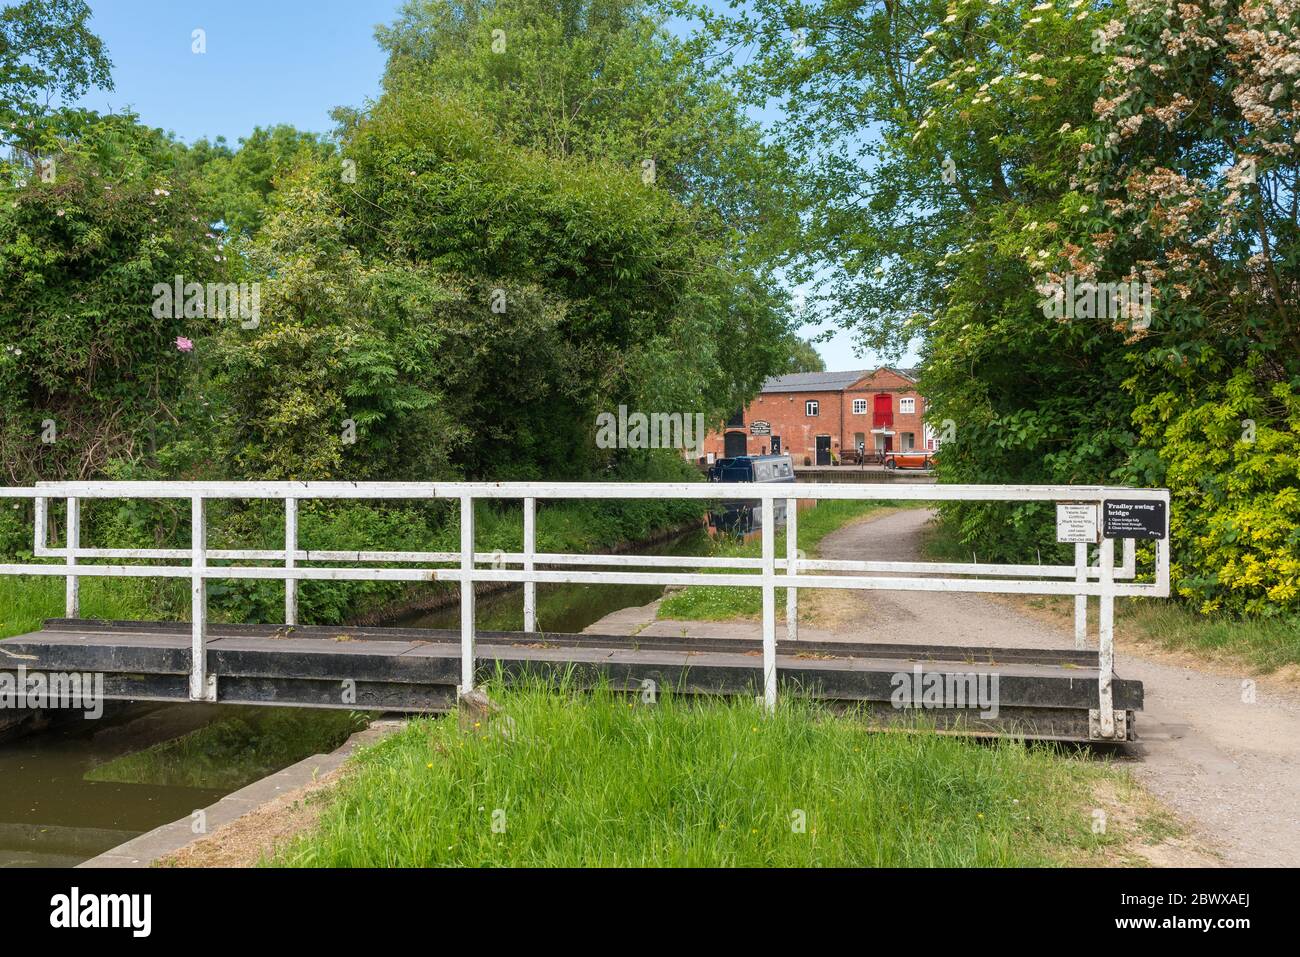 Swingbridge over the Coventry canal at Fradley Junction in Staffordshire which is at the junction of the trent and mersey canal and coventry canal Stock Photo